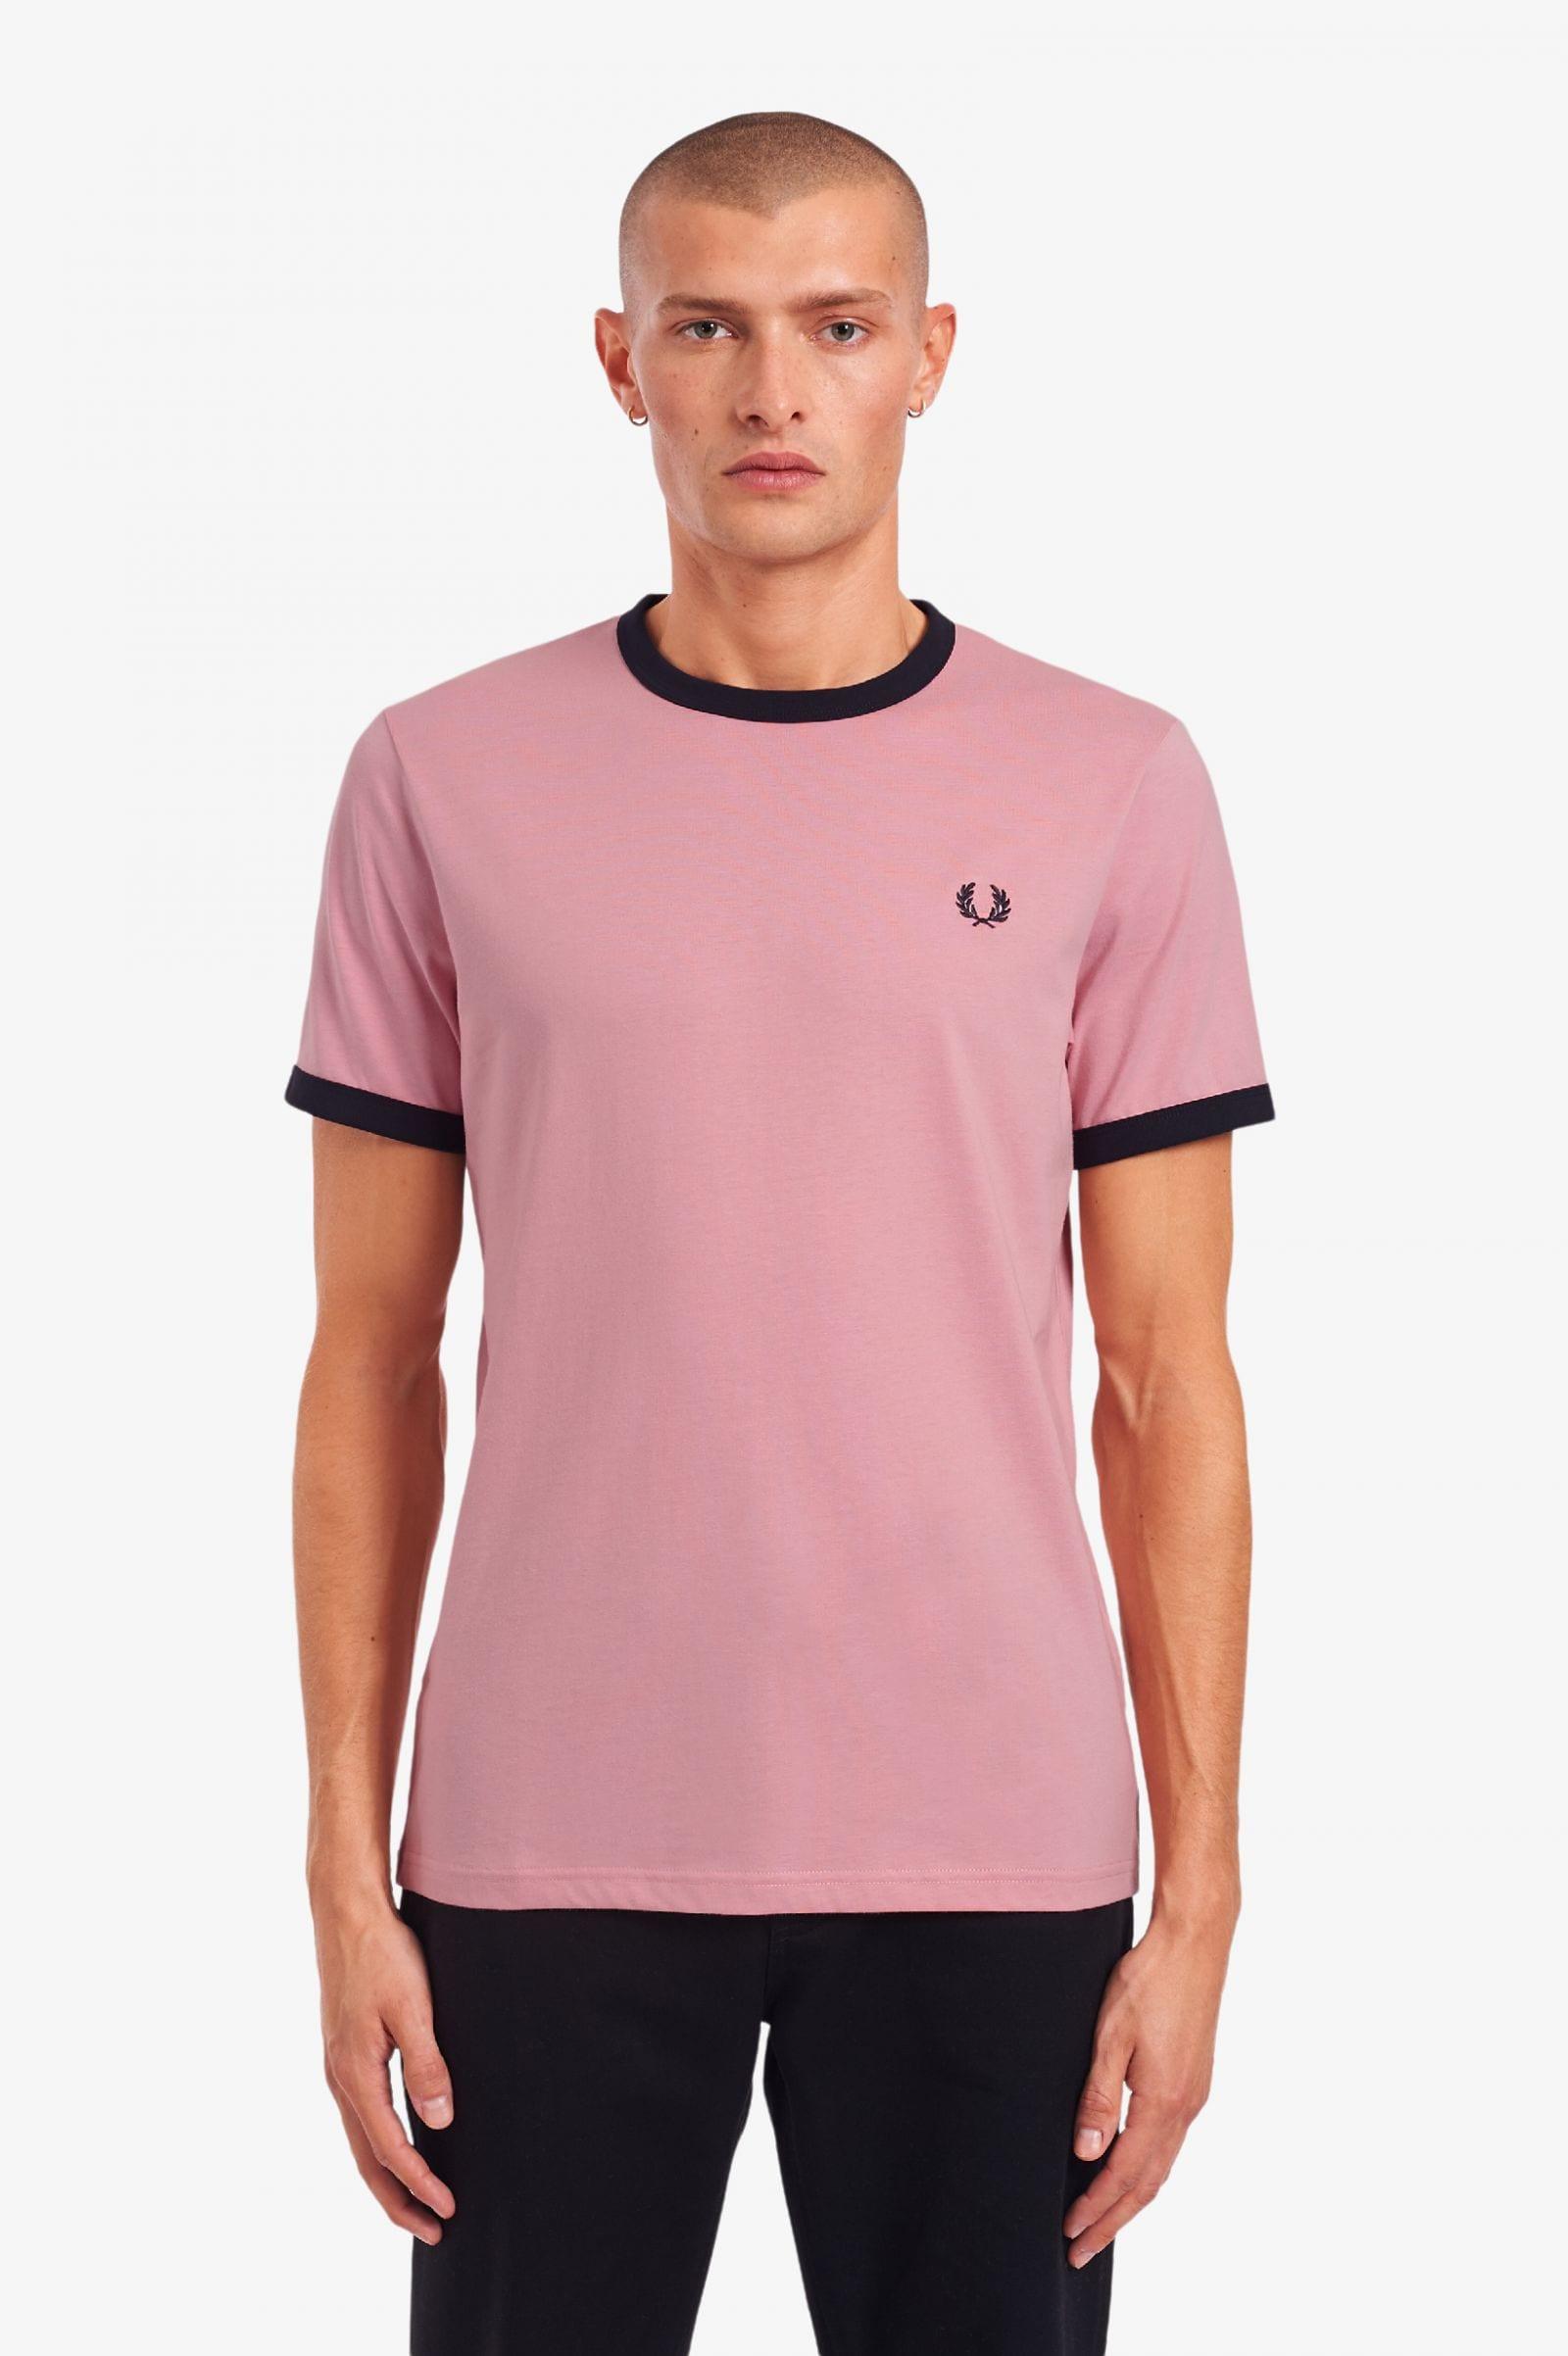 Fred Perry Cotton Ringer T-shirt M3519 Chalk in Pink for Men - Lyst